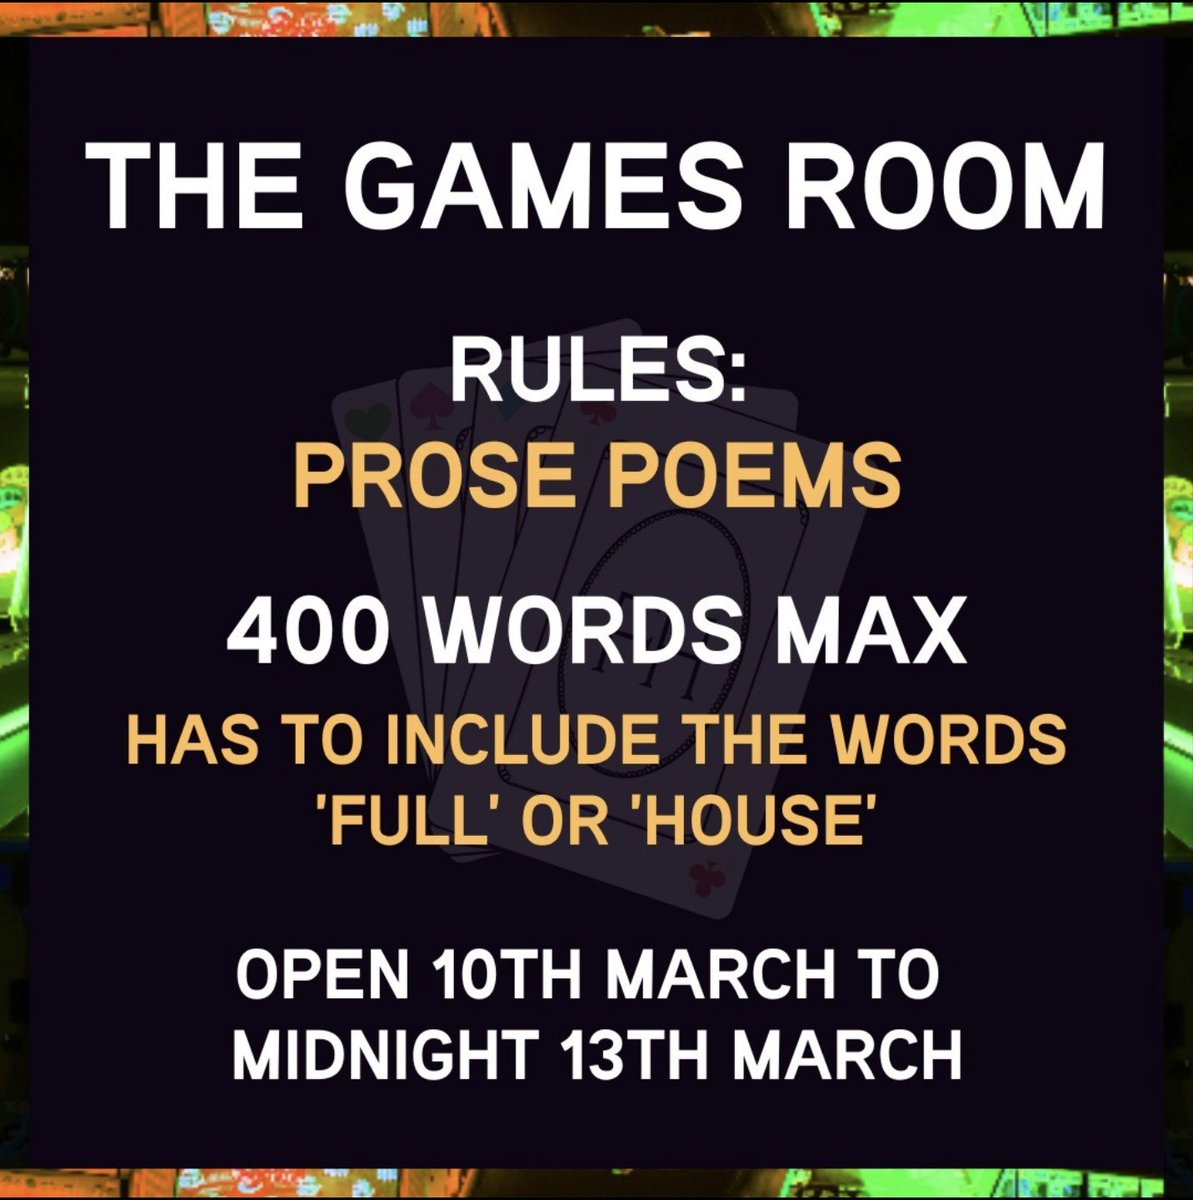 Good morning, lovely followers!

We are open for subs of PROSE POEMS!

Our Games Room is open for submissions until Sun midnight GMT for prose poems <400 words that inc the word 'full' or 'house'

Submit via Submittable: fullhouseliterary.submittable.com/submit